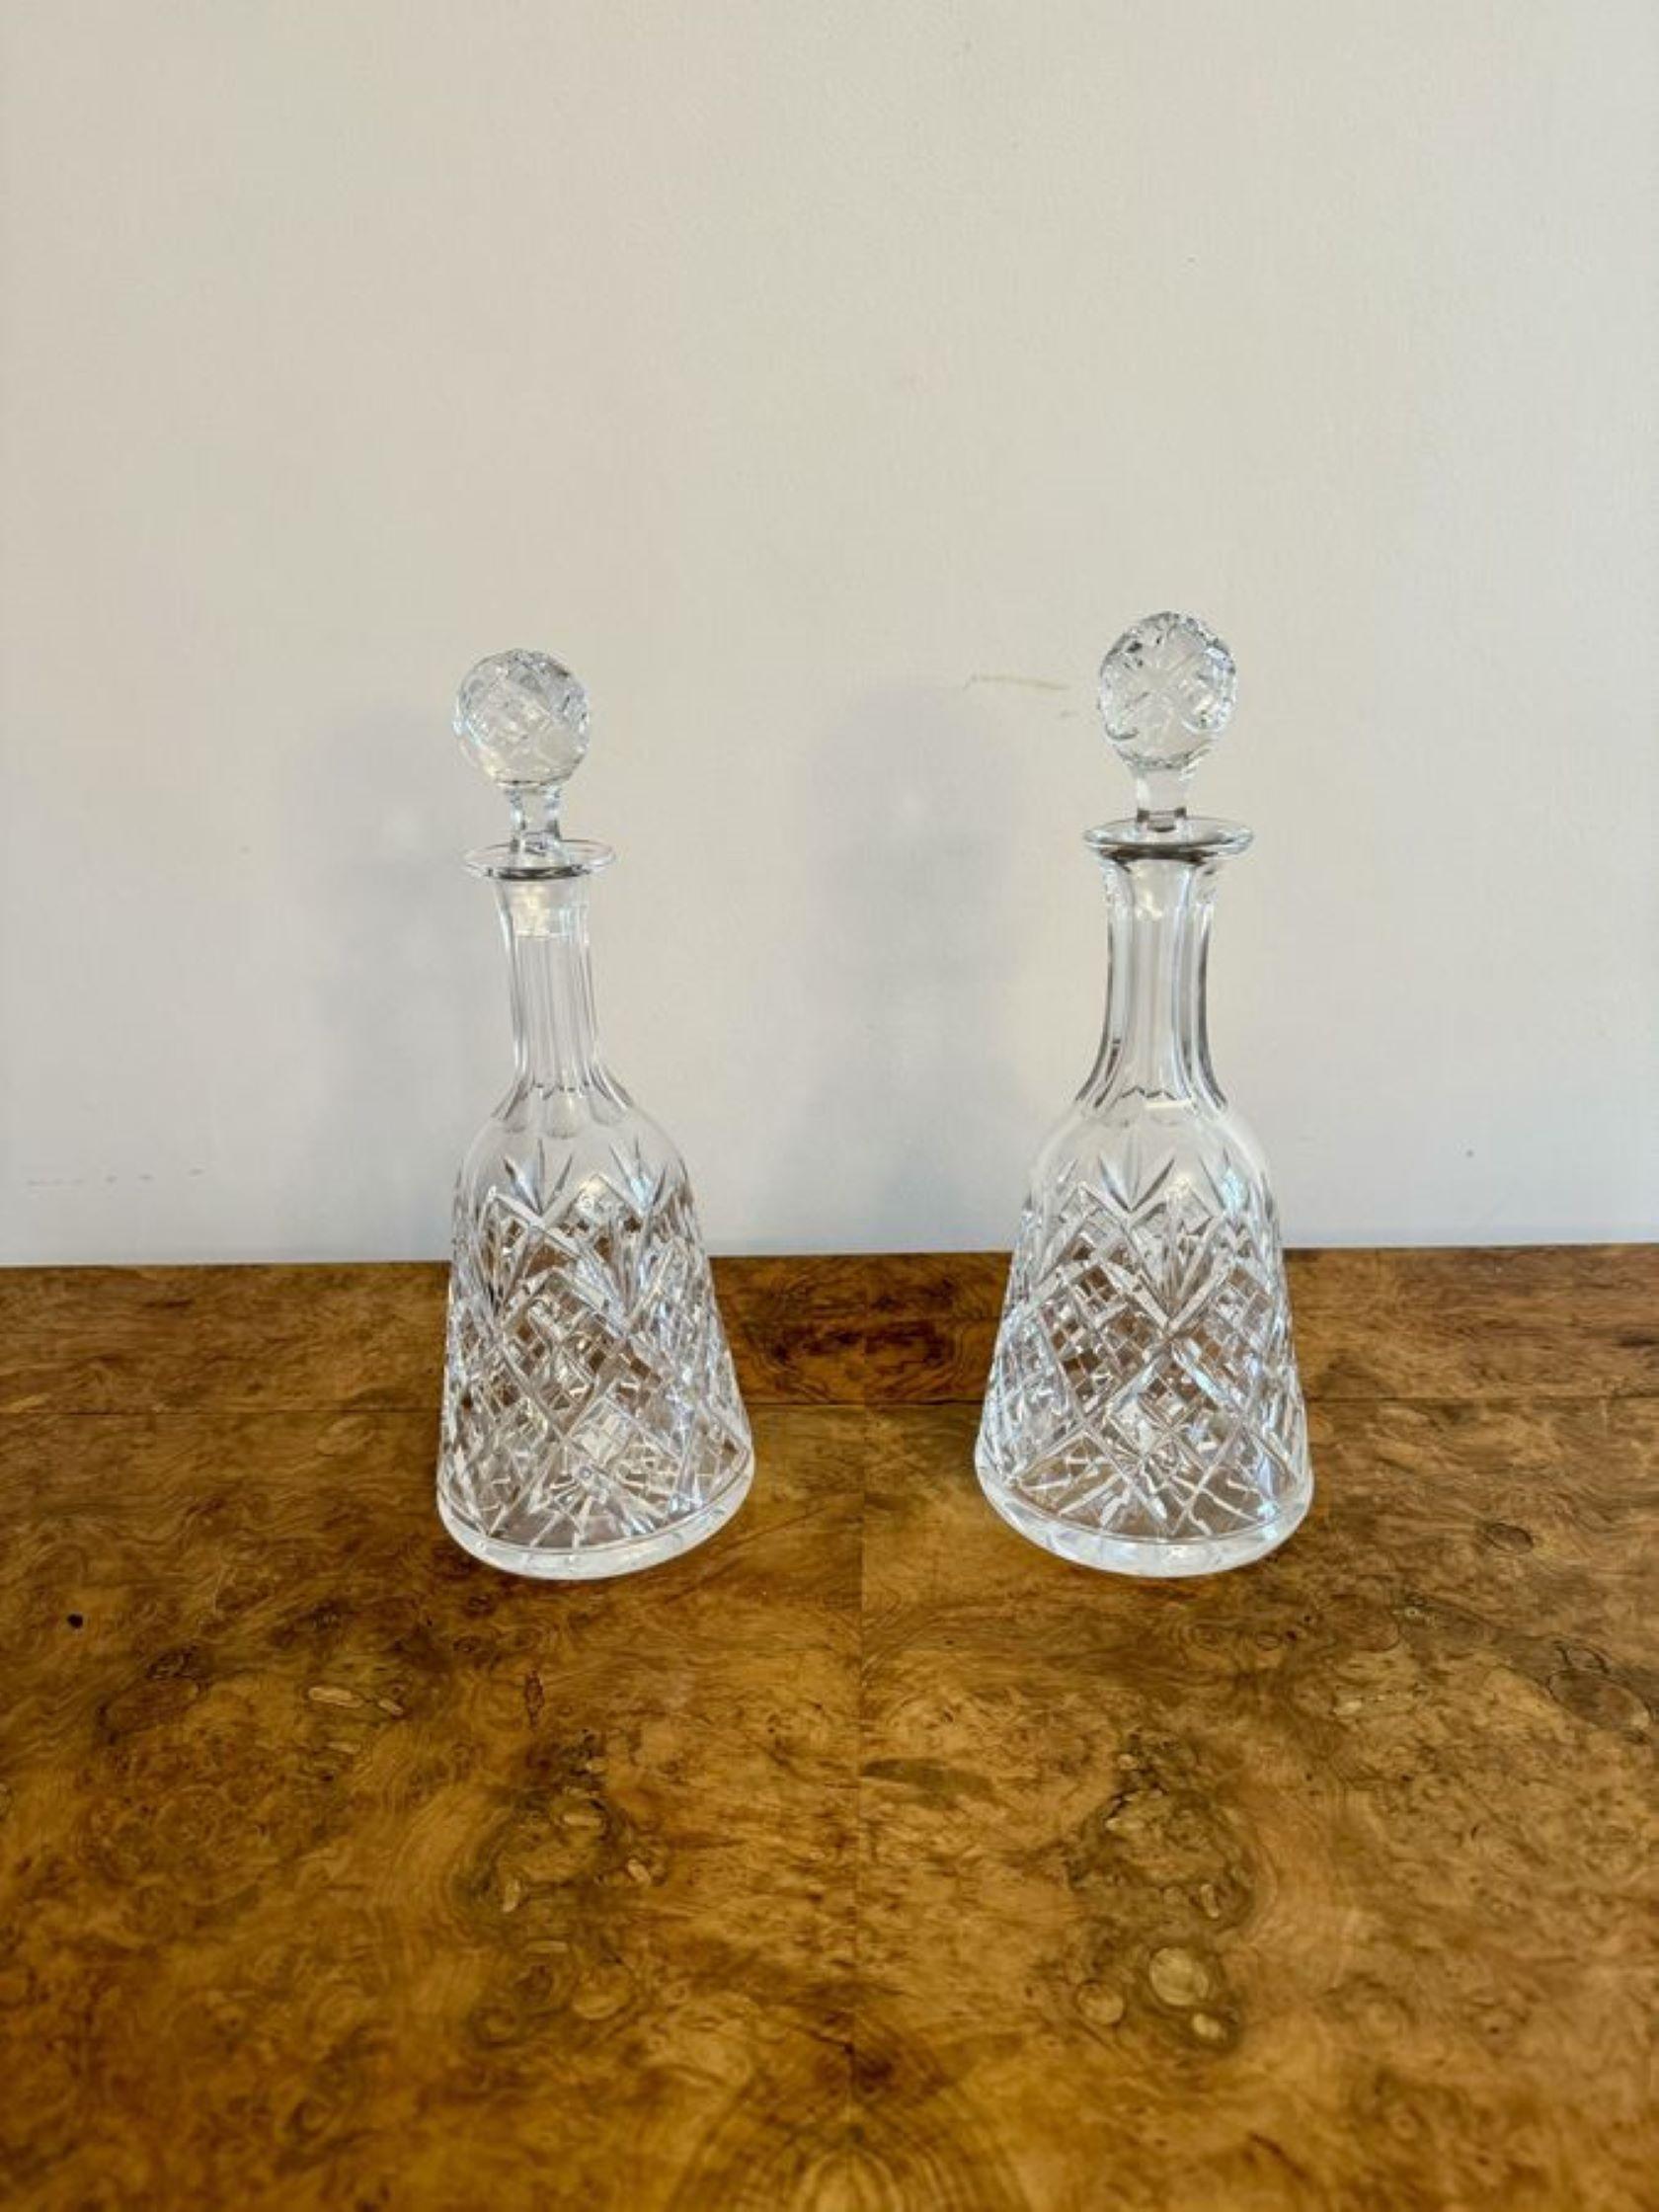 Lovely pair of antique Edwardian bell shaped decanters having a lovely pair of antique Edwardian bell shaped decanters with cut glass bodies and the original cut glass stoppers.

D. 1900